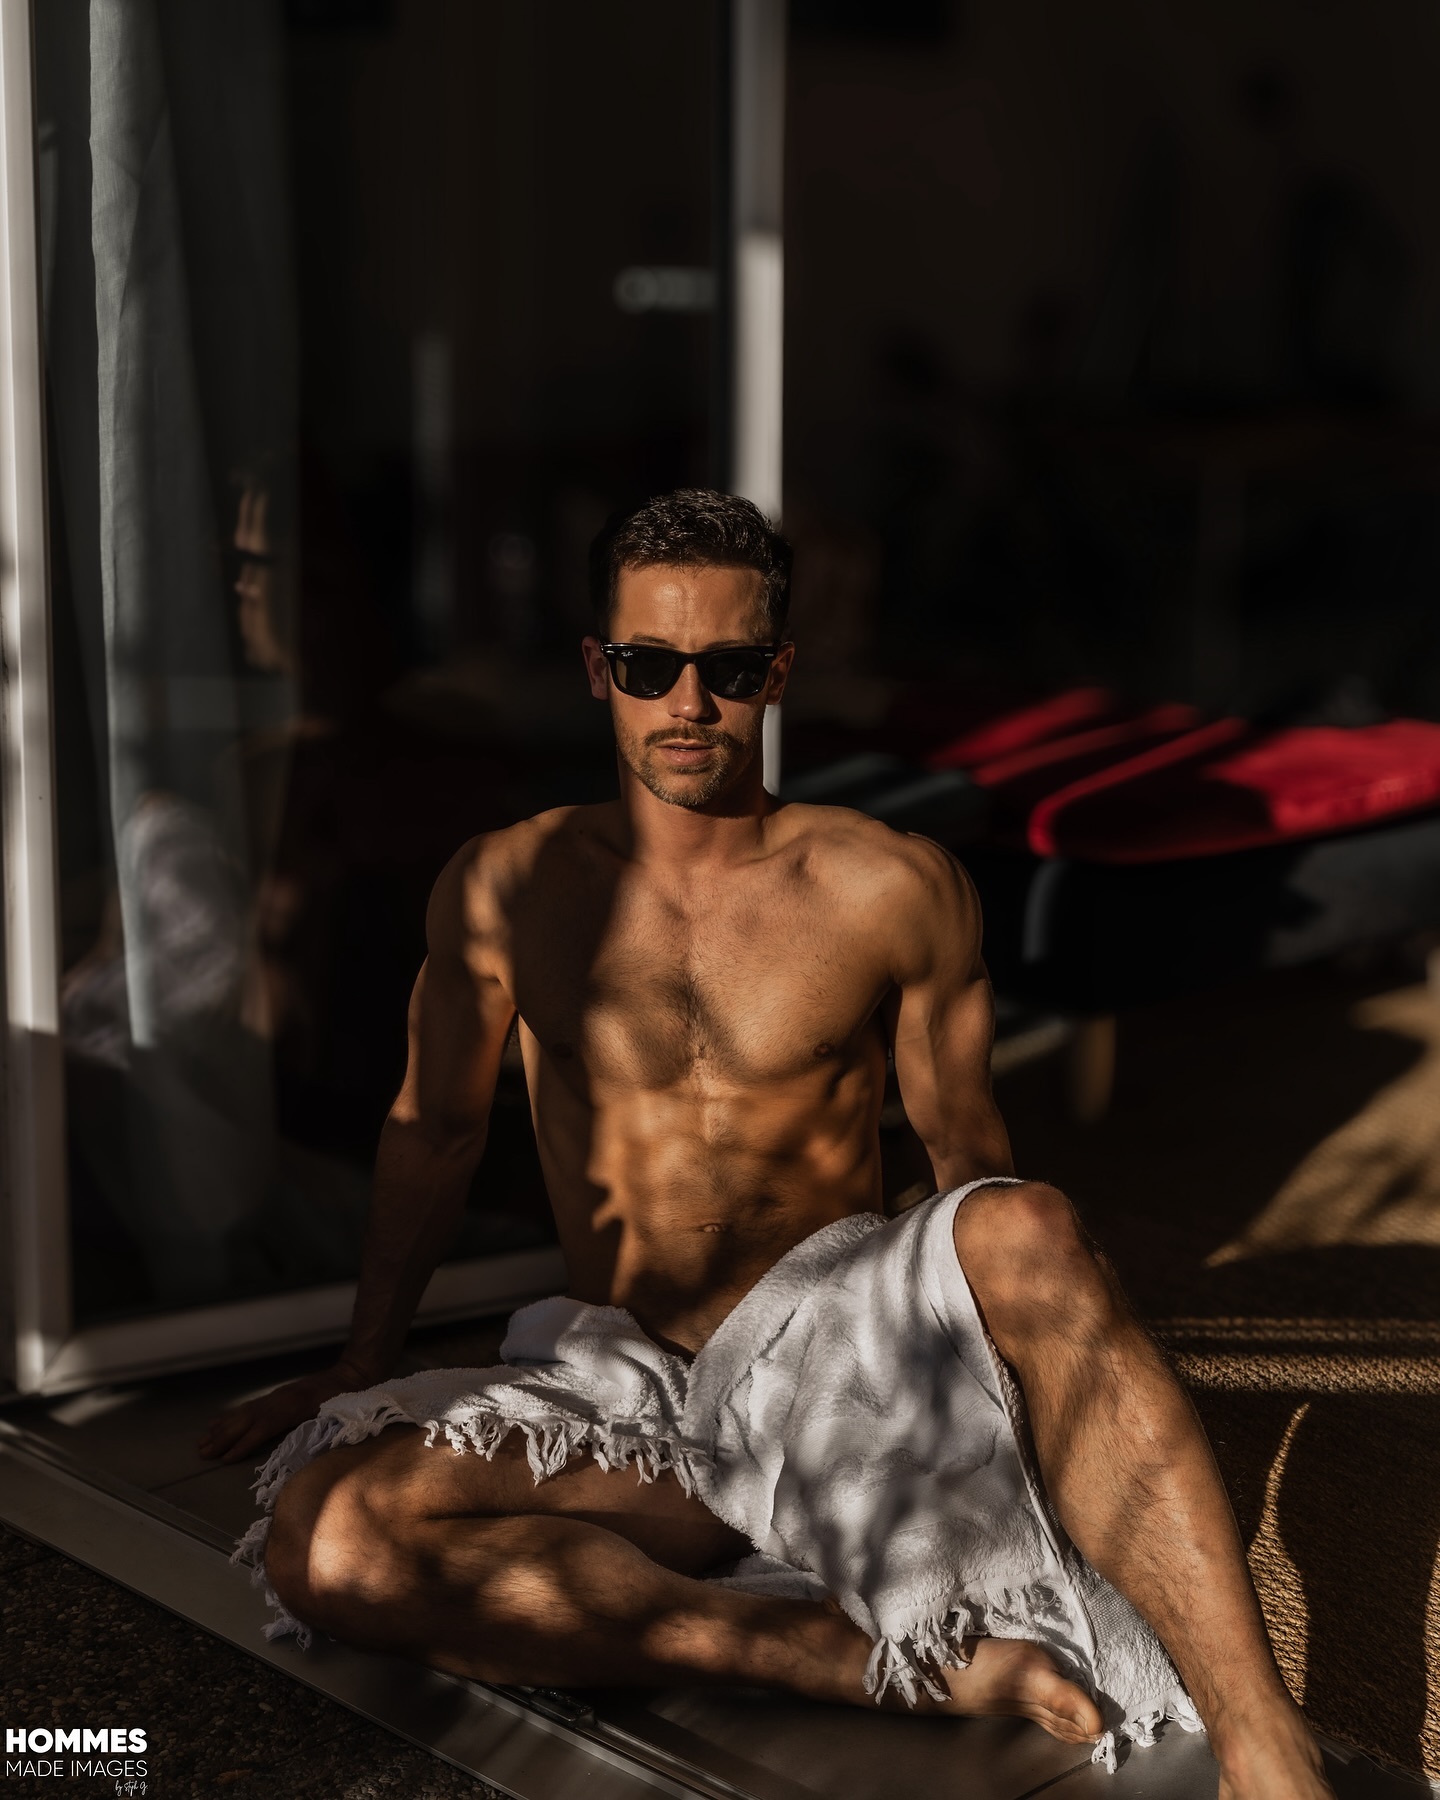 Towel 
-
-
-
#corphotography #towelseries #modèles #malemodels #beautifulmensbody #hairychests #hairymenaddict #musclemodel #beardedgay #raw #photographer #photographie #followmeback 

📸 @hommes_made_images 
With @kevinpcbk